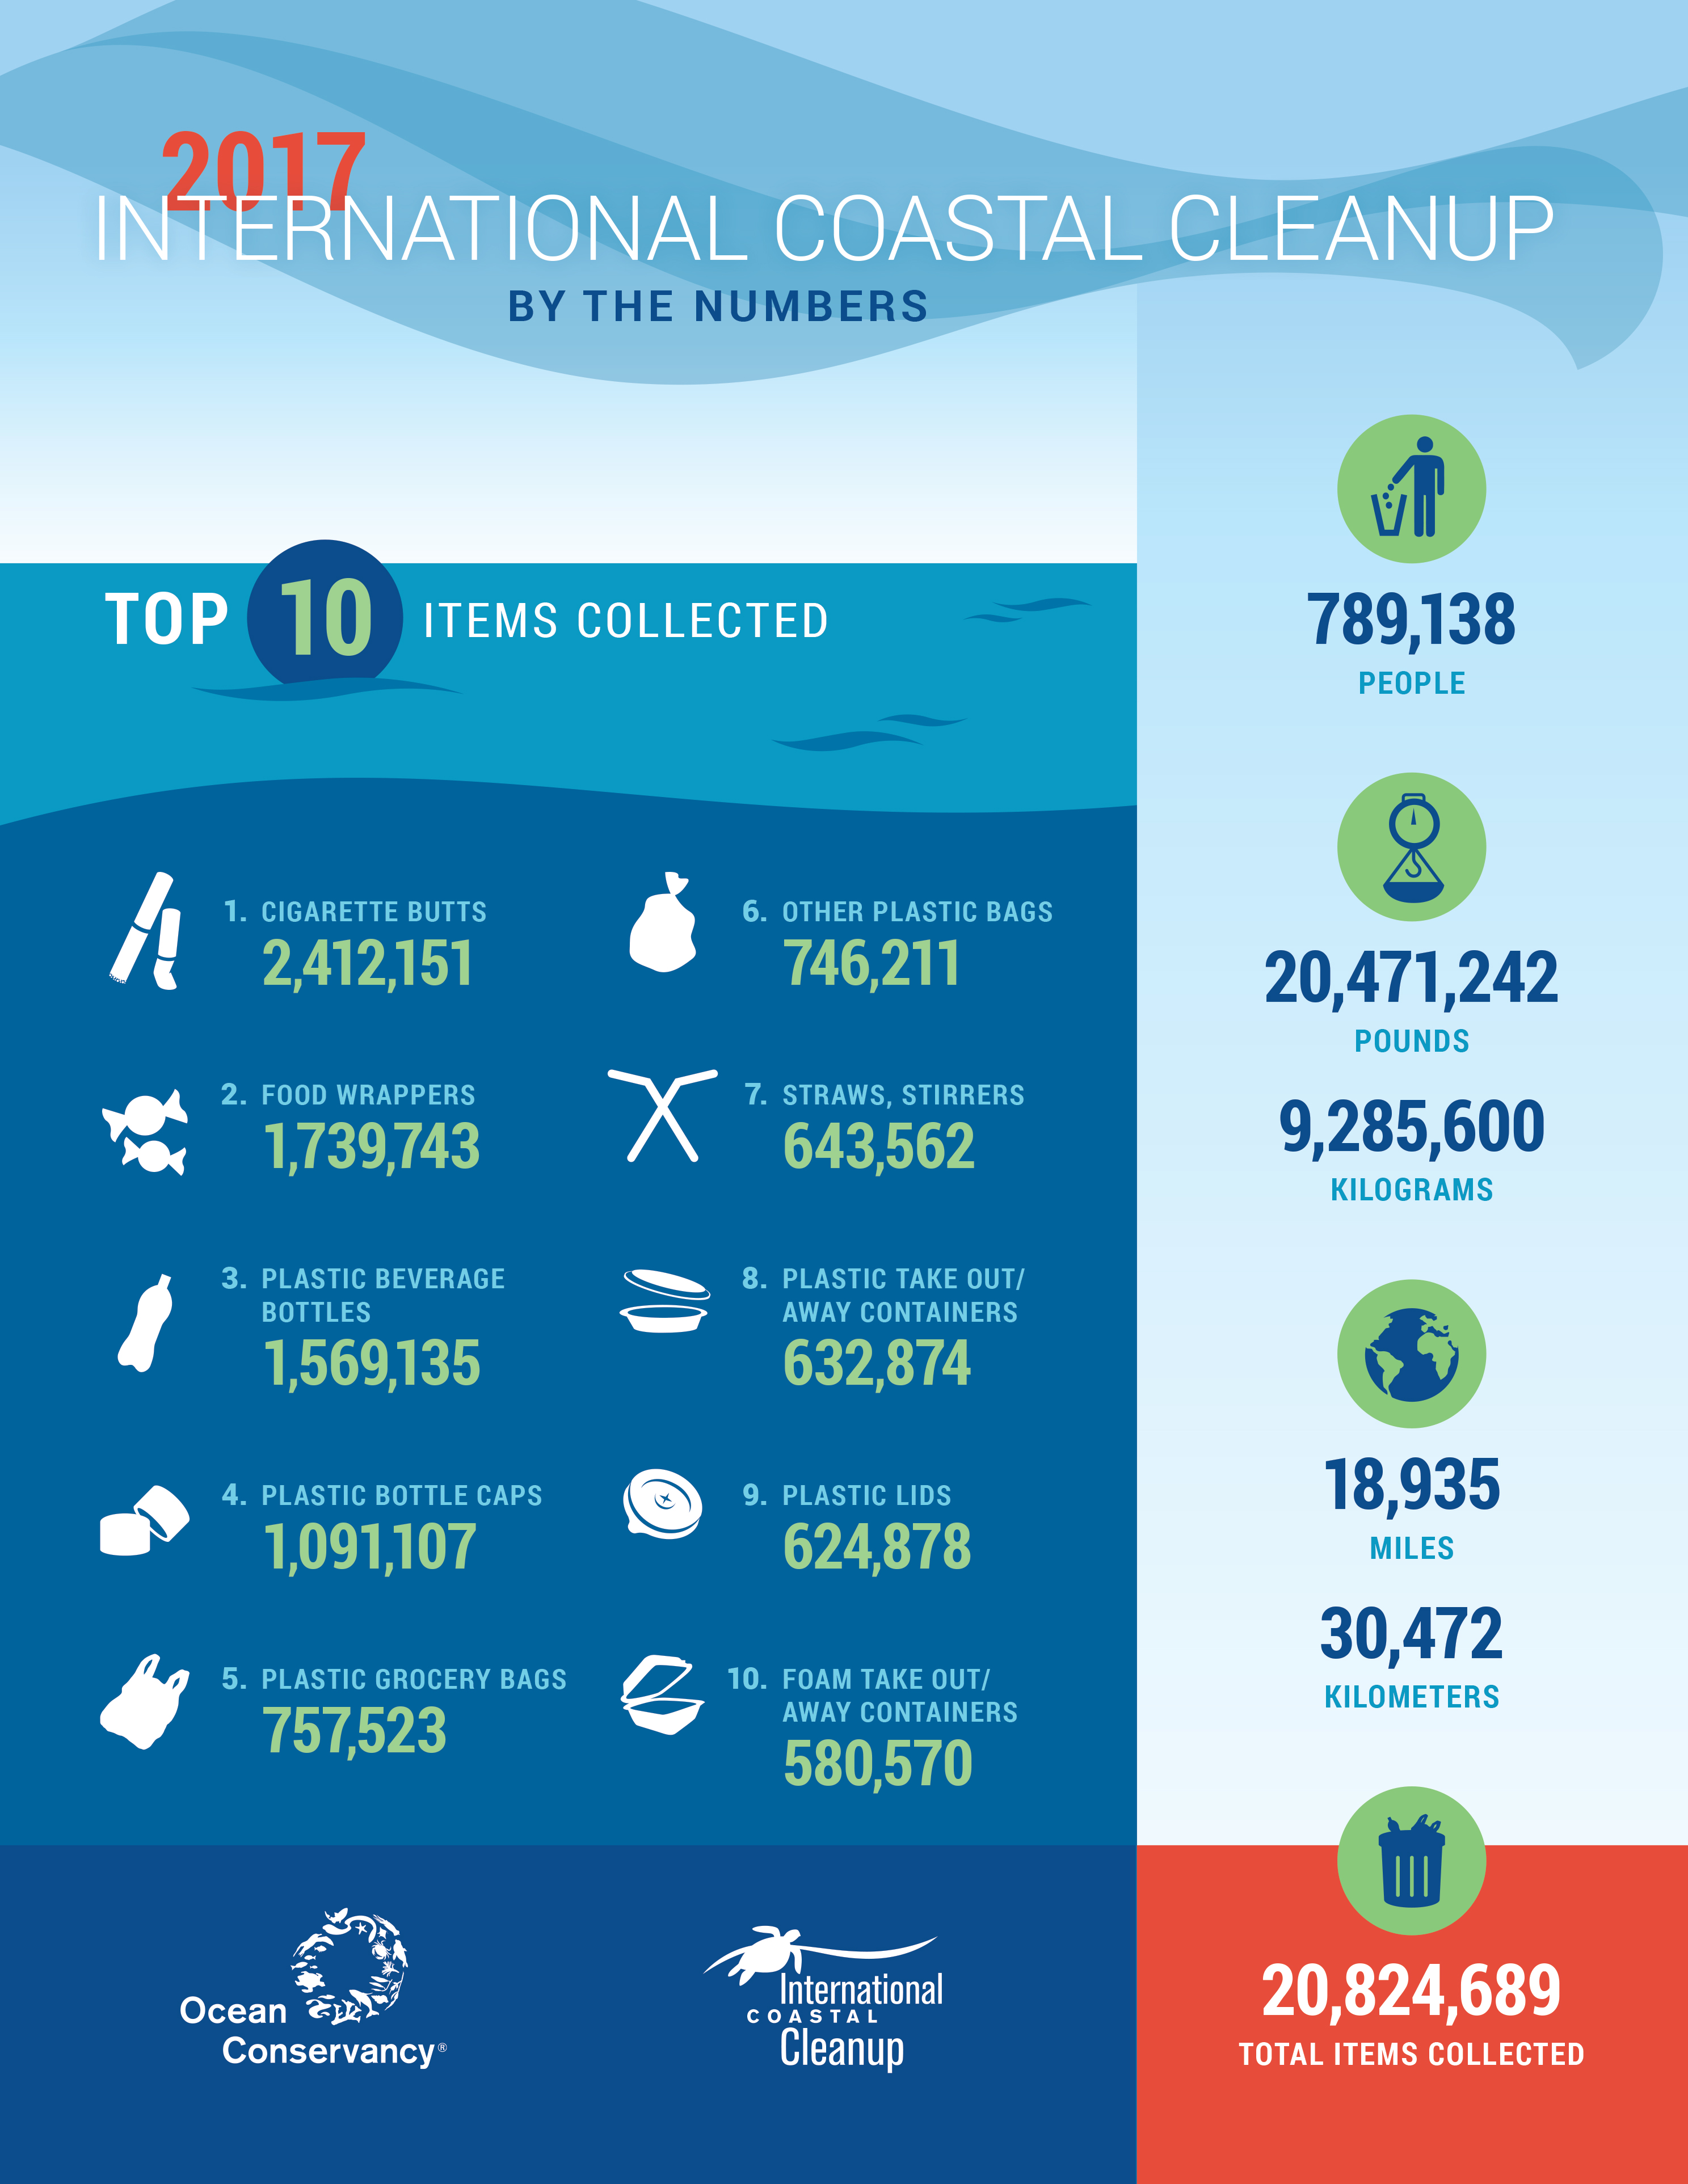 Here are the Top 10 items collected during the 2017 International Coastal Cleanup.